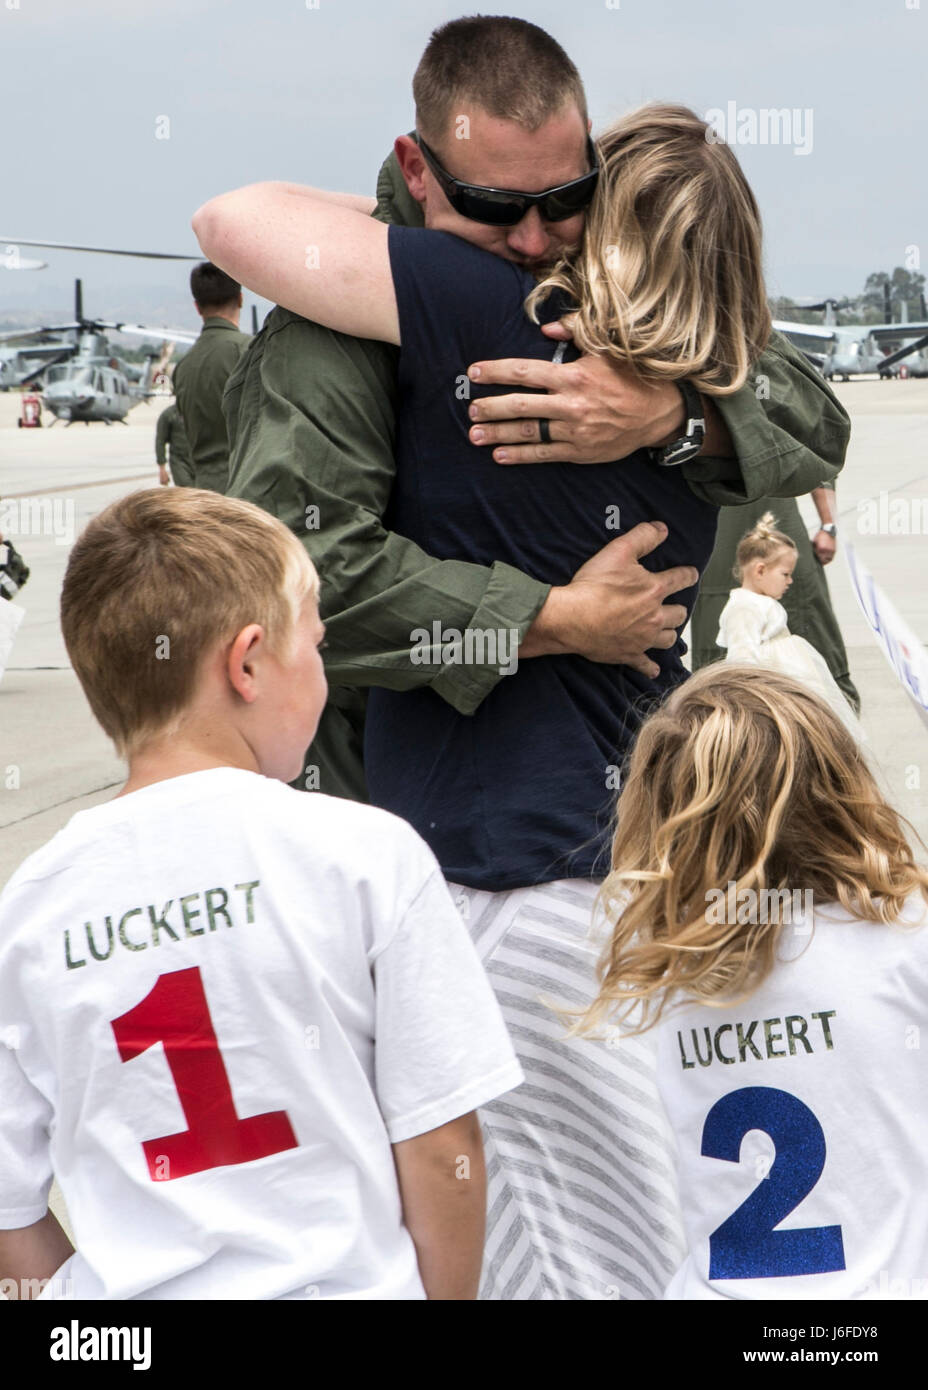 U.S. Marine Corps Staff Sgt. Christopher Luckert, a UH-1Y Venom AH-1Z Viper helicopter mechanic with Marine Light Attack Helicopter Squadron 369 (HMLA-369), 3d Marine Aircraft Wing, is reunited with his family after deployment a deployment with the 11th Marine Expeditionary Unit, on Marine Corps Camp Pendleton, Calif., May 12, 2017. Friends and family members welcomed home Marines from the 11th MEU’s Command Element during a homecoming ceremony. (U.S. Marine Corps photo by Lance Cpl. Clare J. Shaffer/Released) Stock Photo